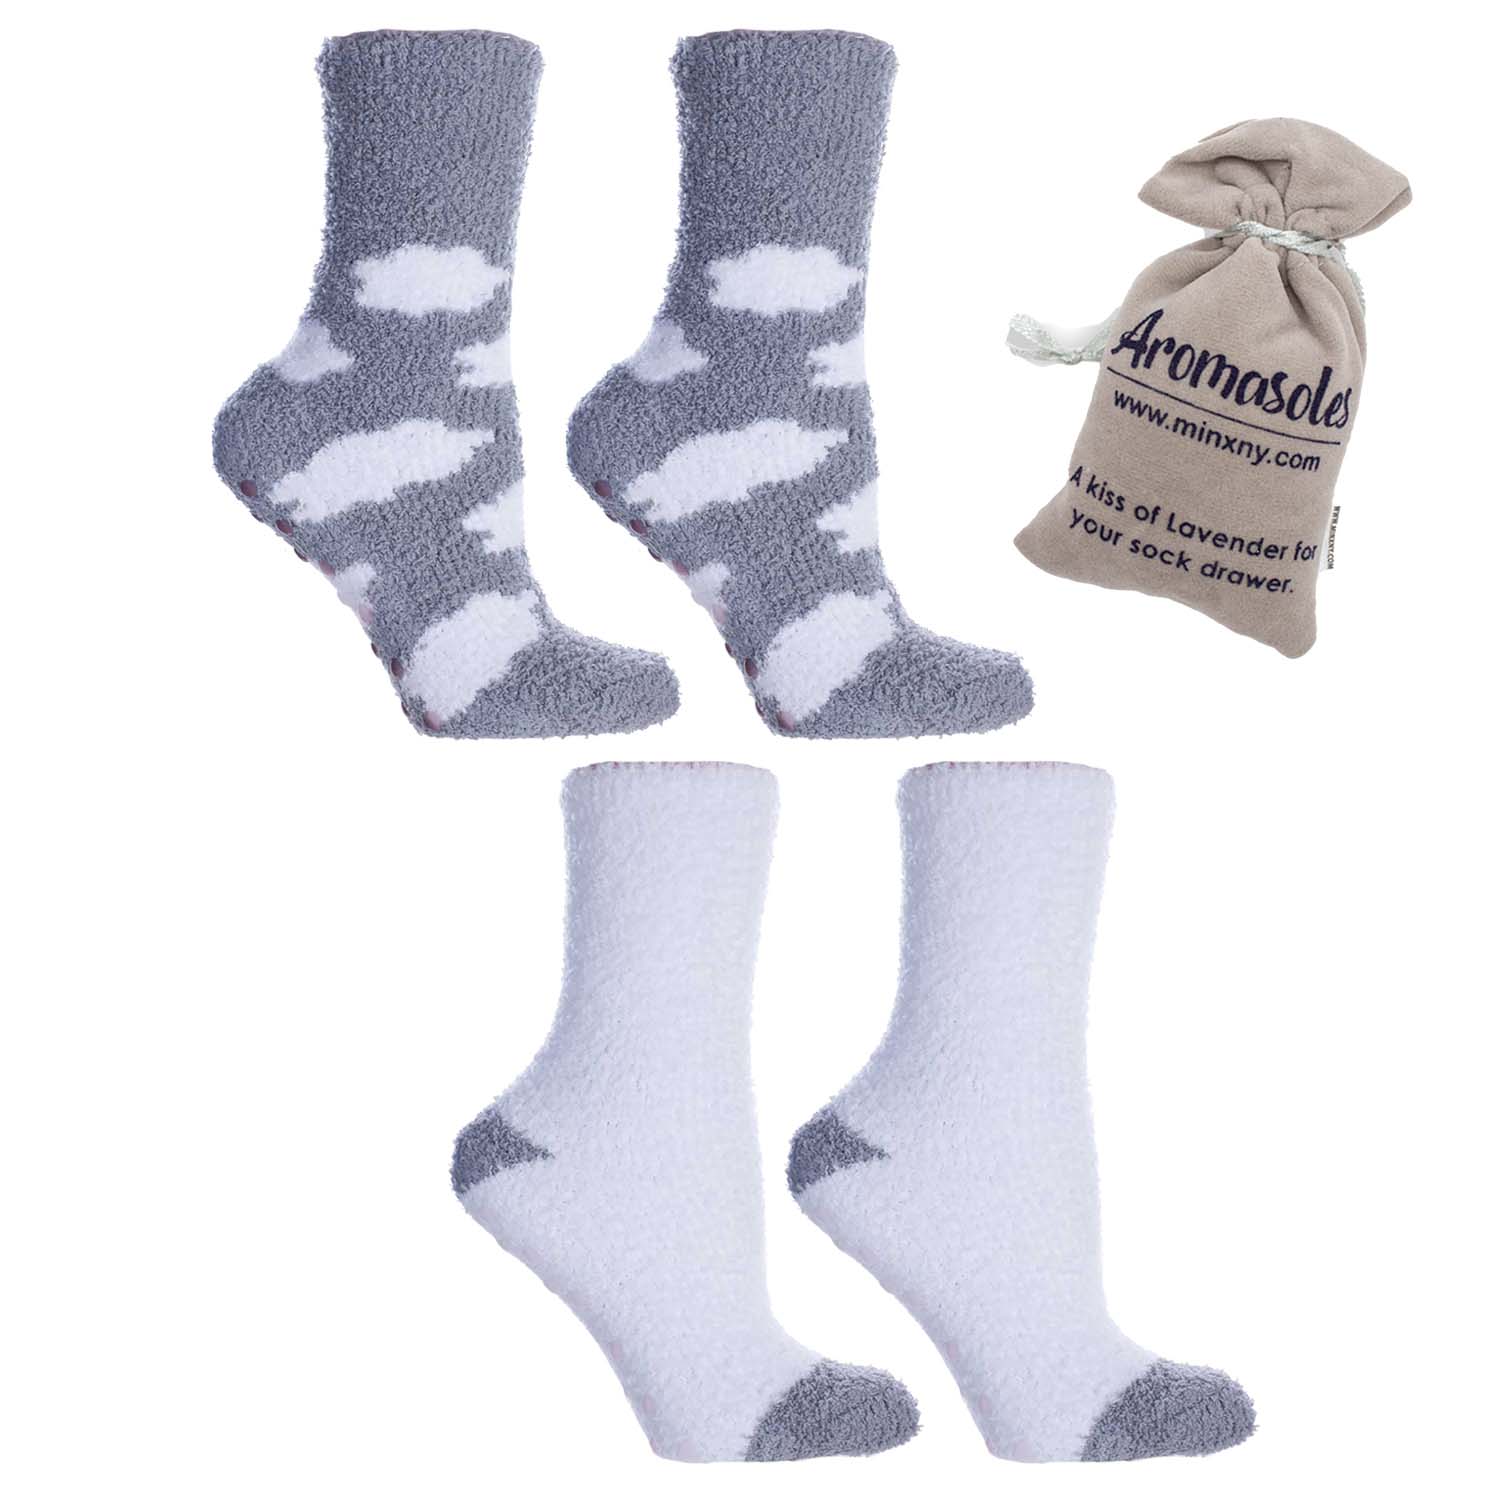 2 Pairs - Non-Skid Fuzzy Lavender Infused Cloud Slipper Socks with Lavender Sachet